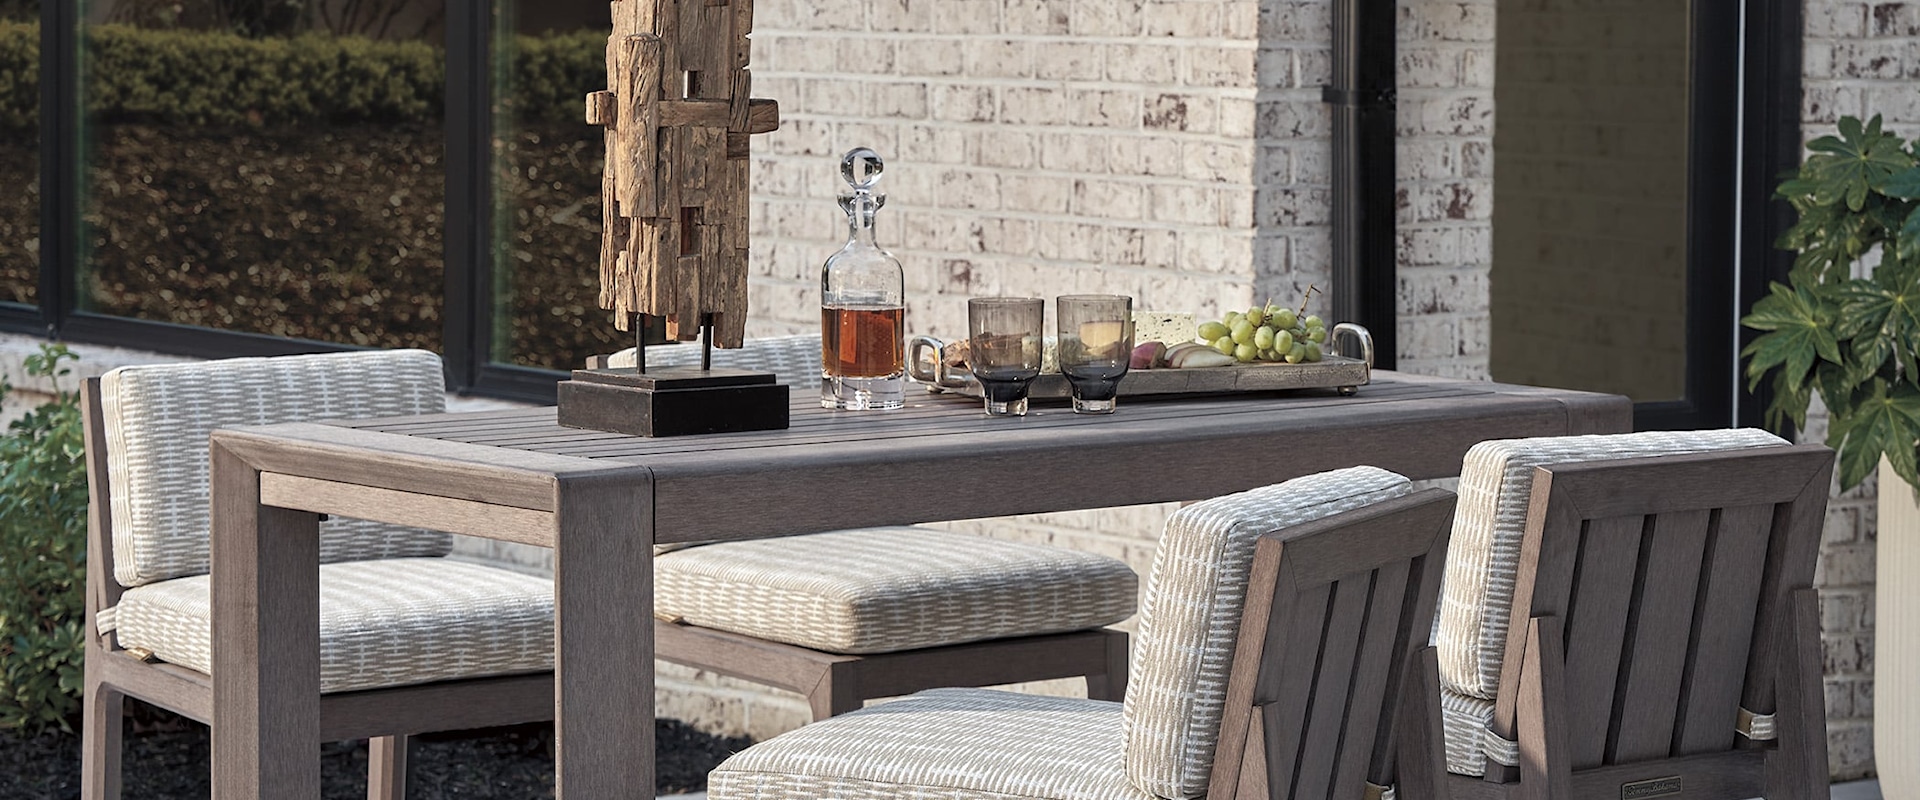 Contemporary 5-Piece Outdoor Dining Set with Bar Stools